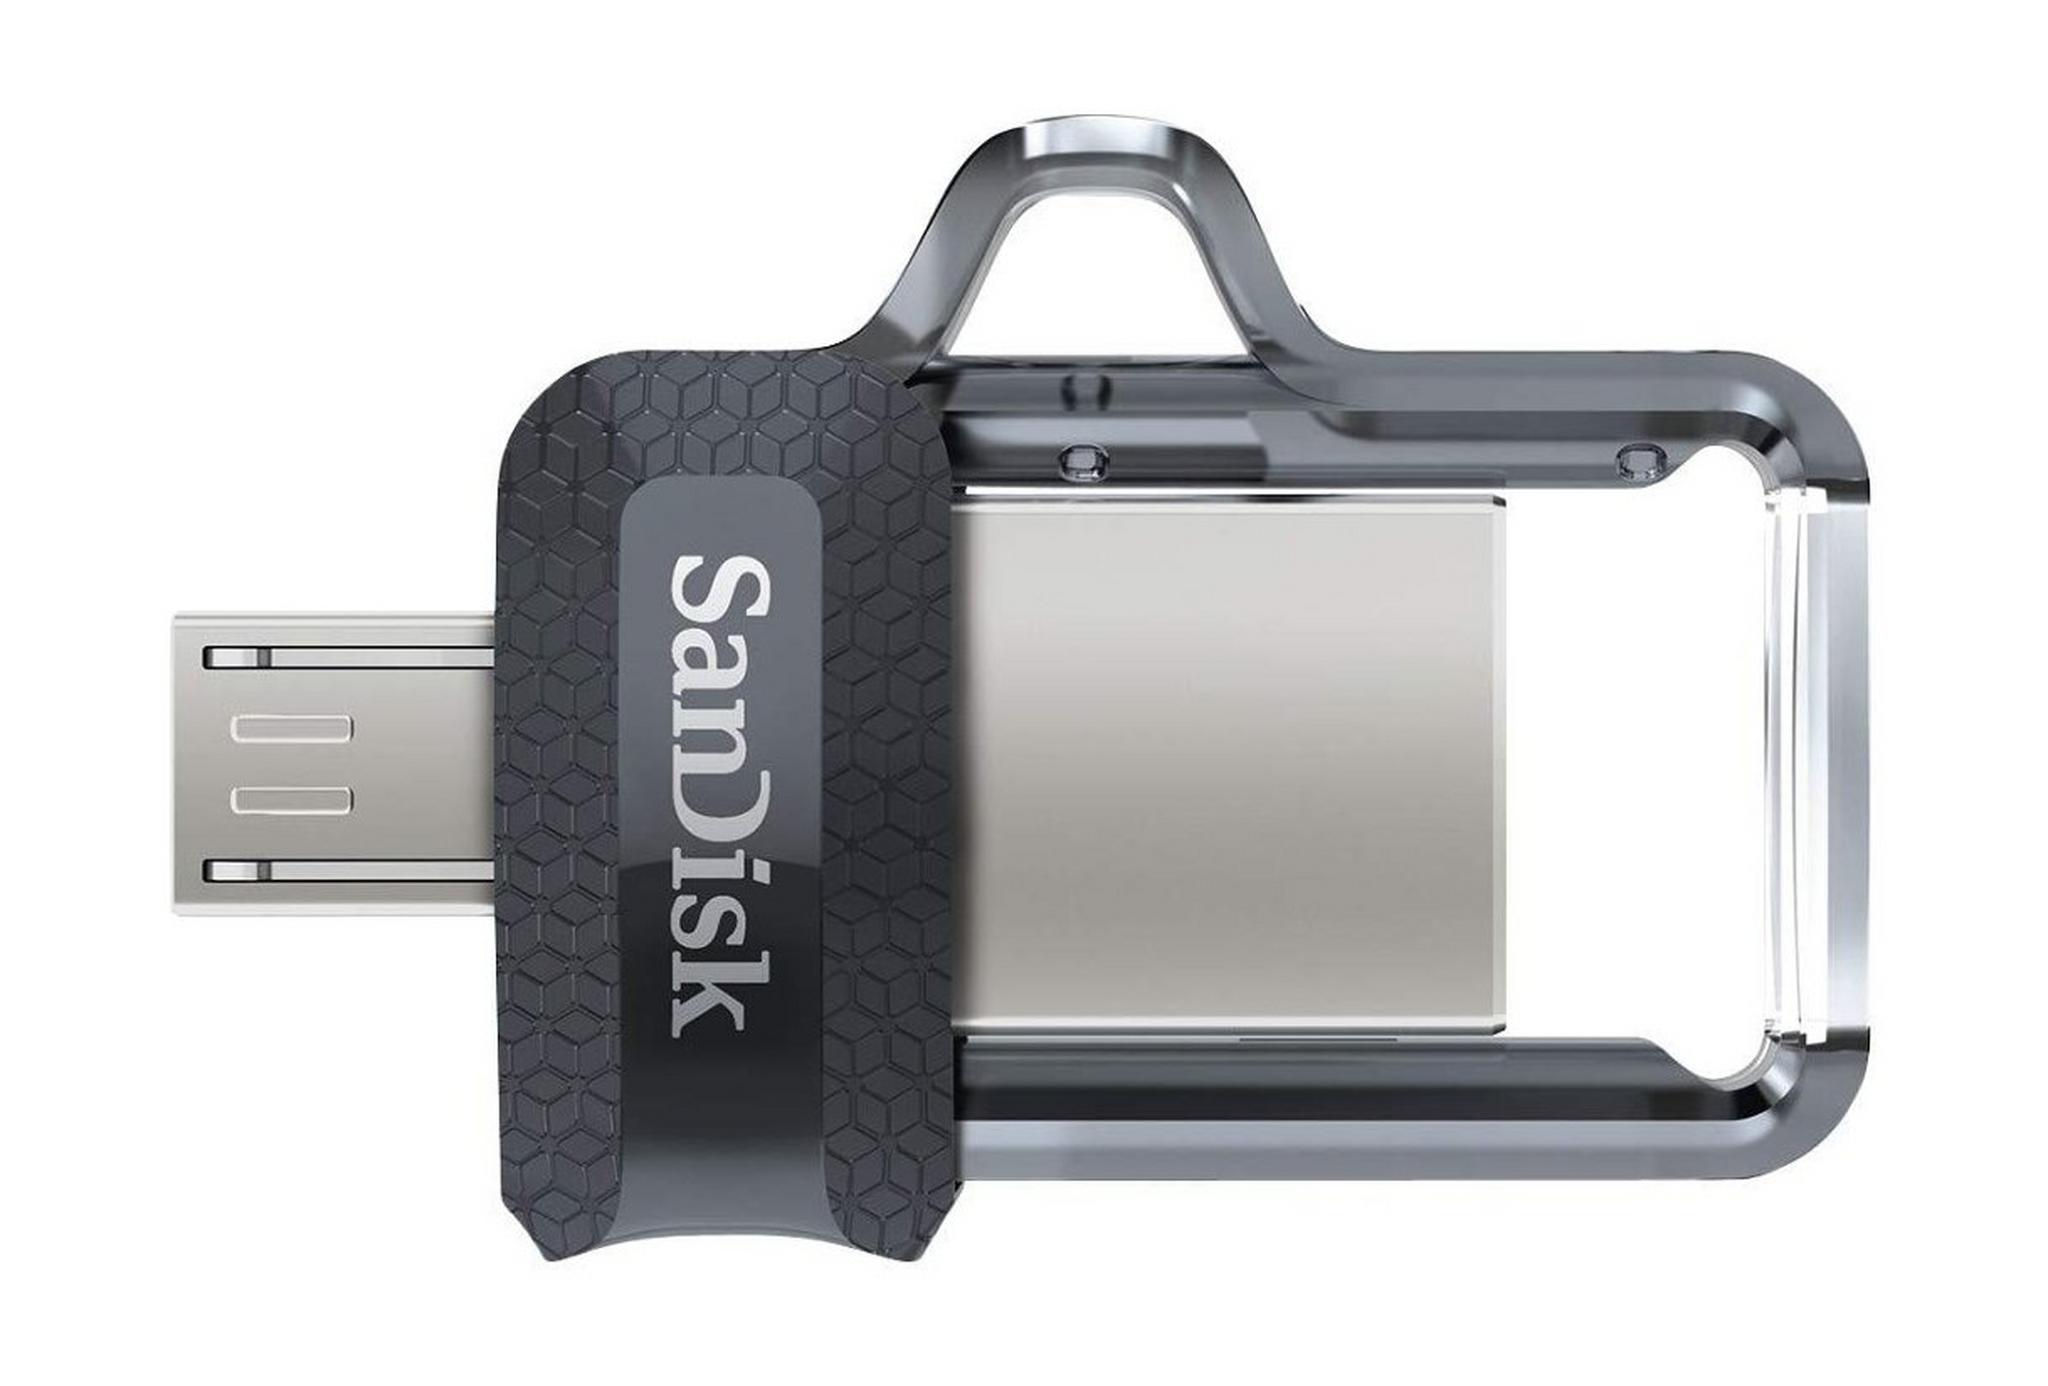 Sandisk 128GB M3.0 Dual USB Drive for Android Devices & Computer - (SDDD3-256G-G46)